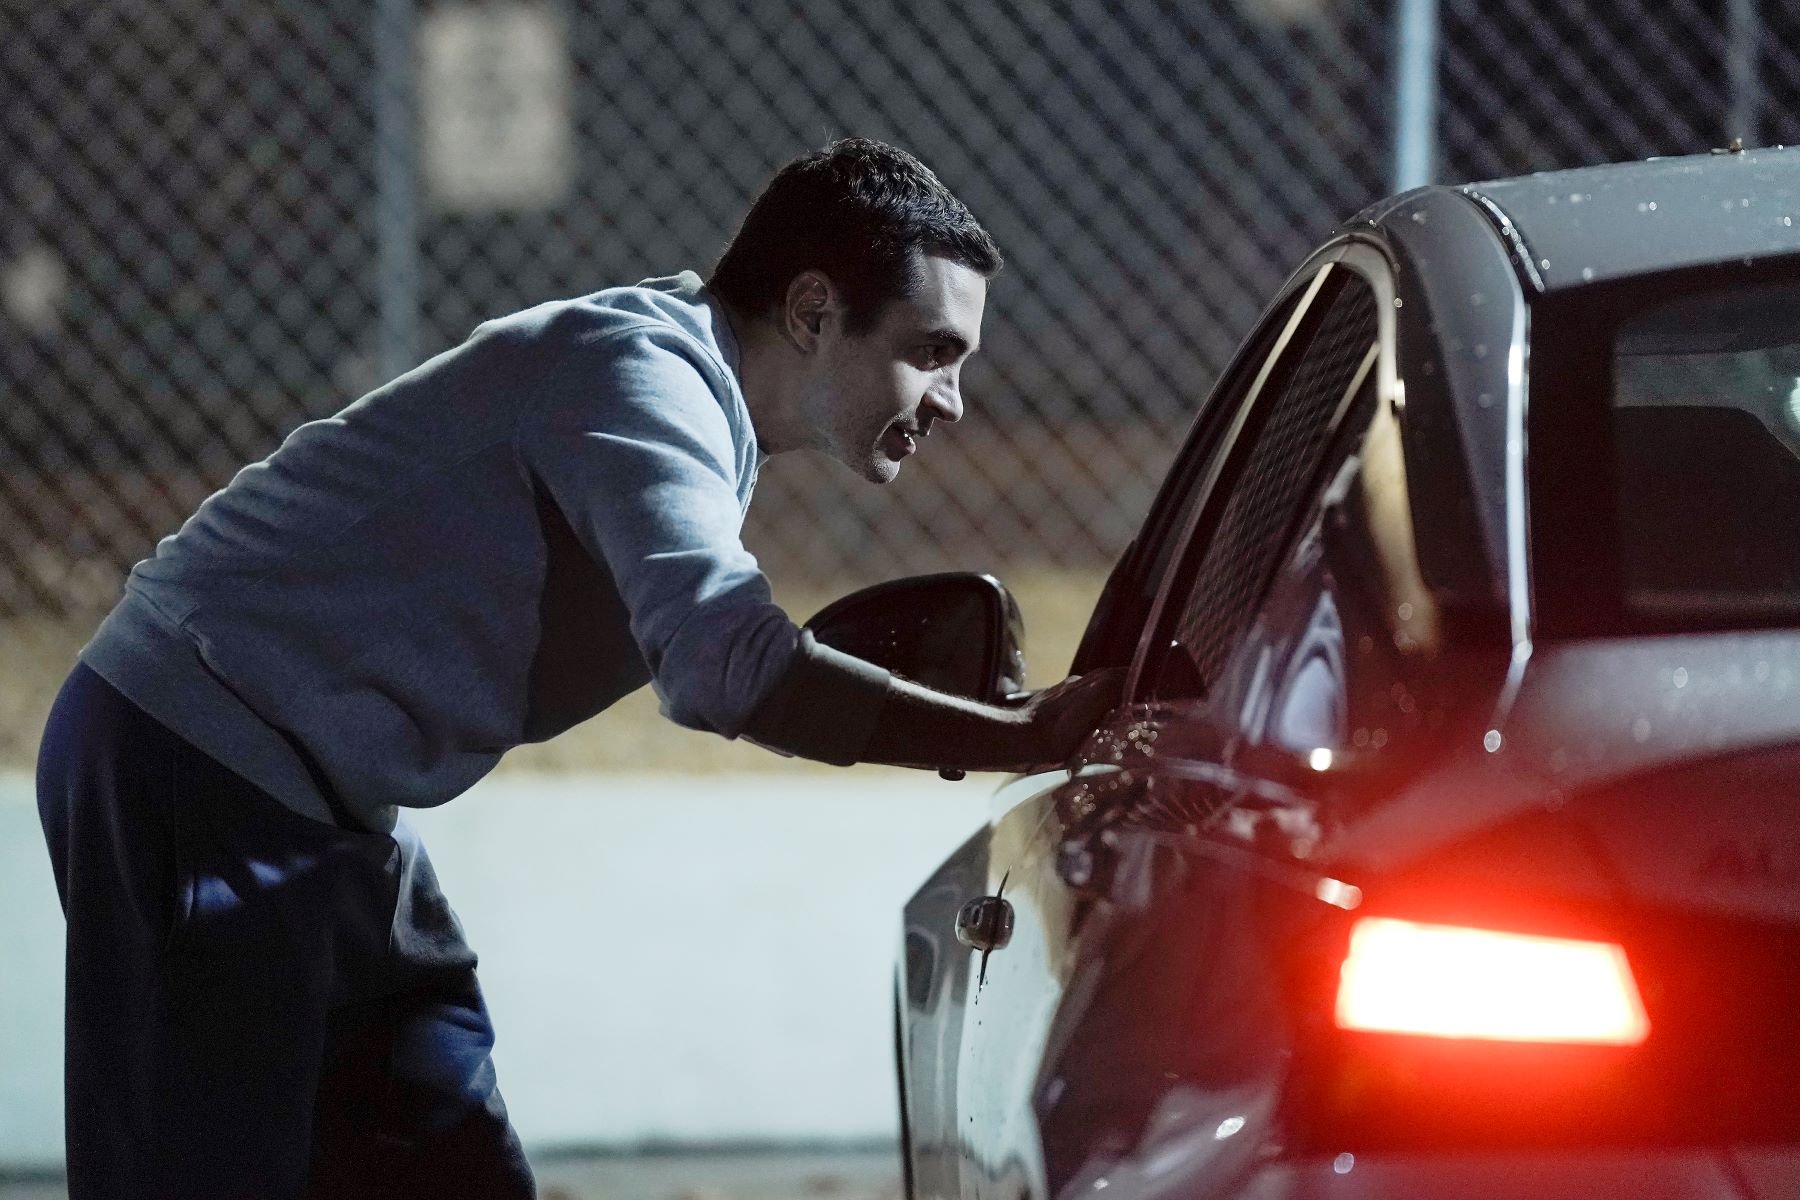 Ramón Rodríguez, in character as Will Trent in 'Will Trent' Season 1 Episode 6, wears a light gray sweater and blue sweatpants as he approaches a car.